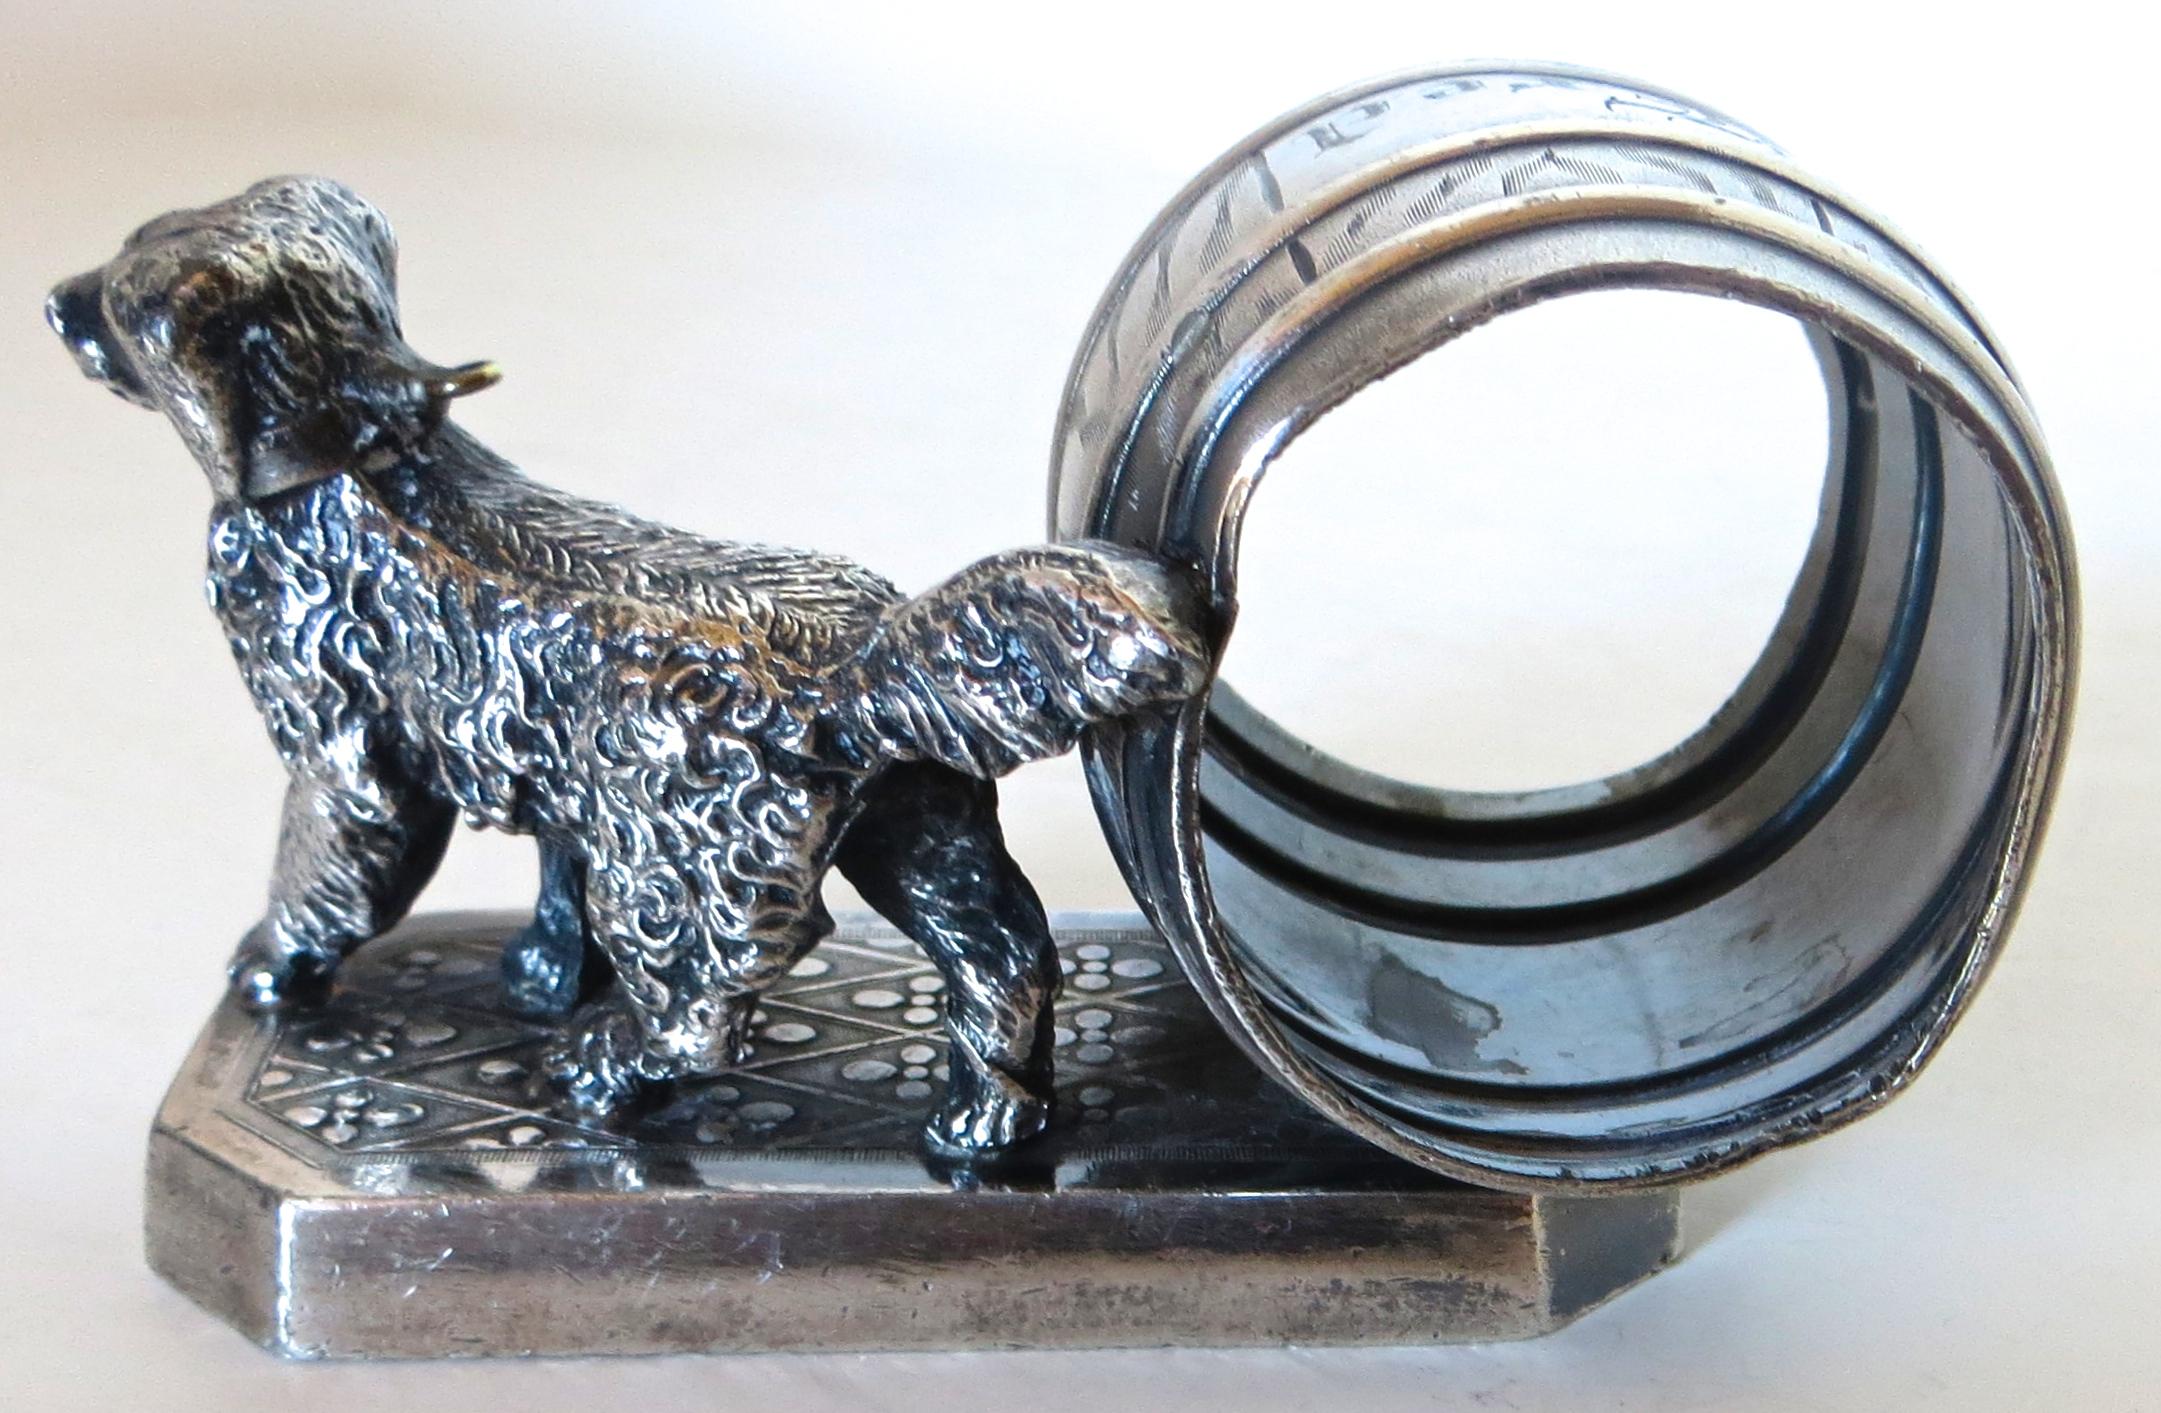 This is another in the long line of highly desirable animal themed silver plated Victorian napkin rings, except this particular ring is especially sought after because it mounts the same dog that is found on the rare 